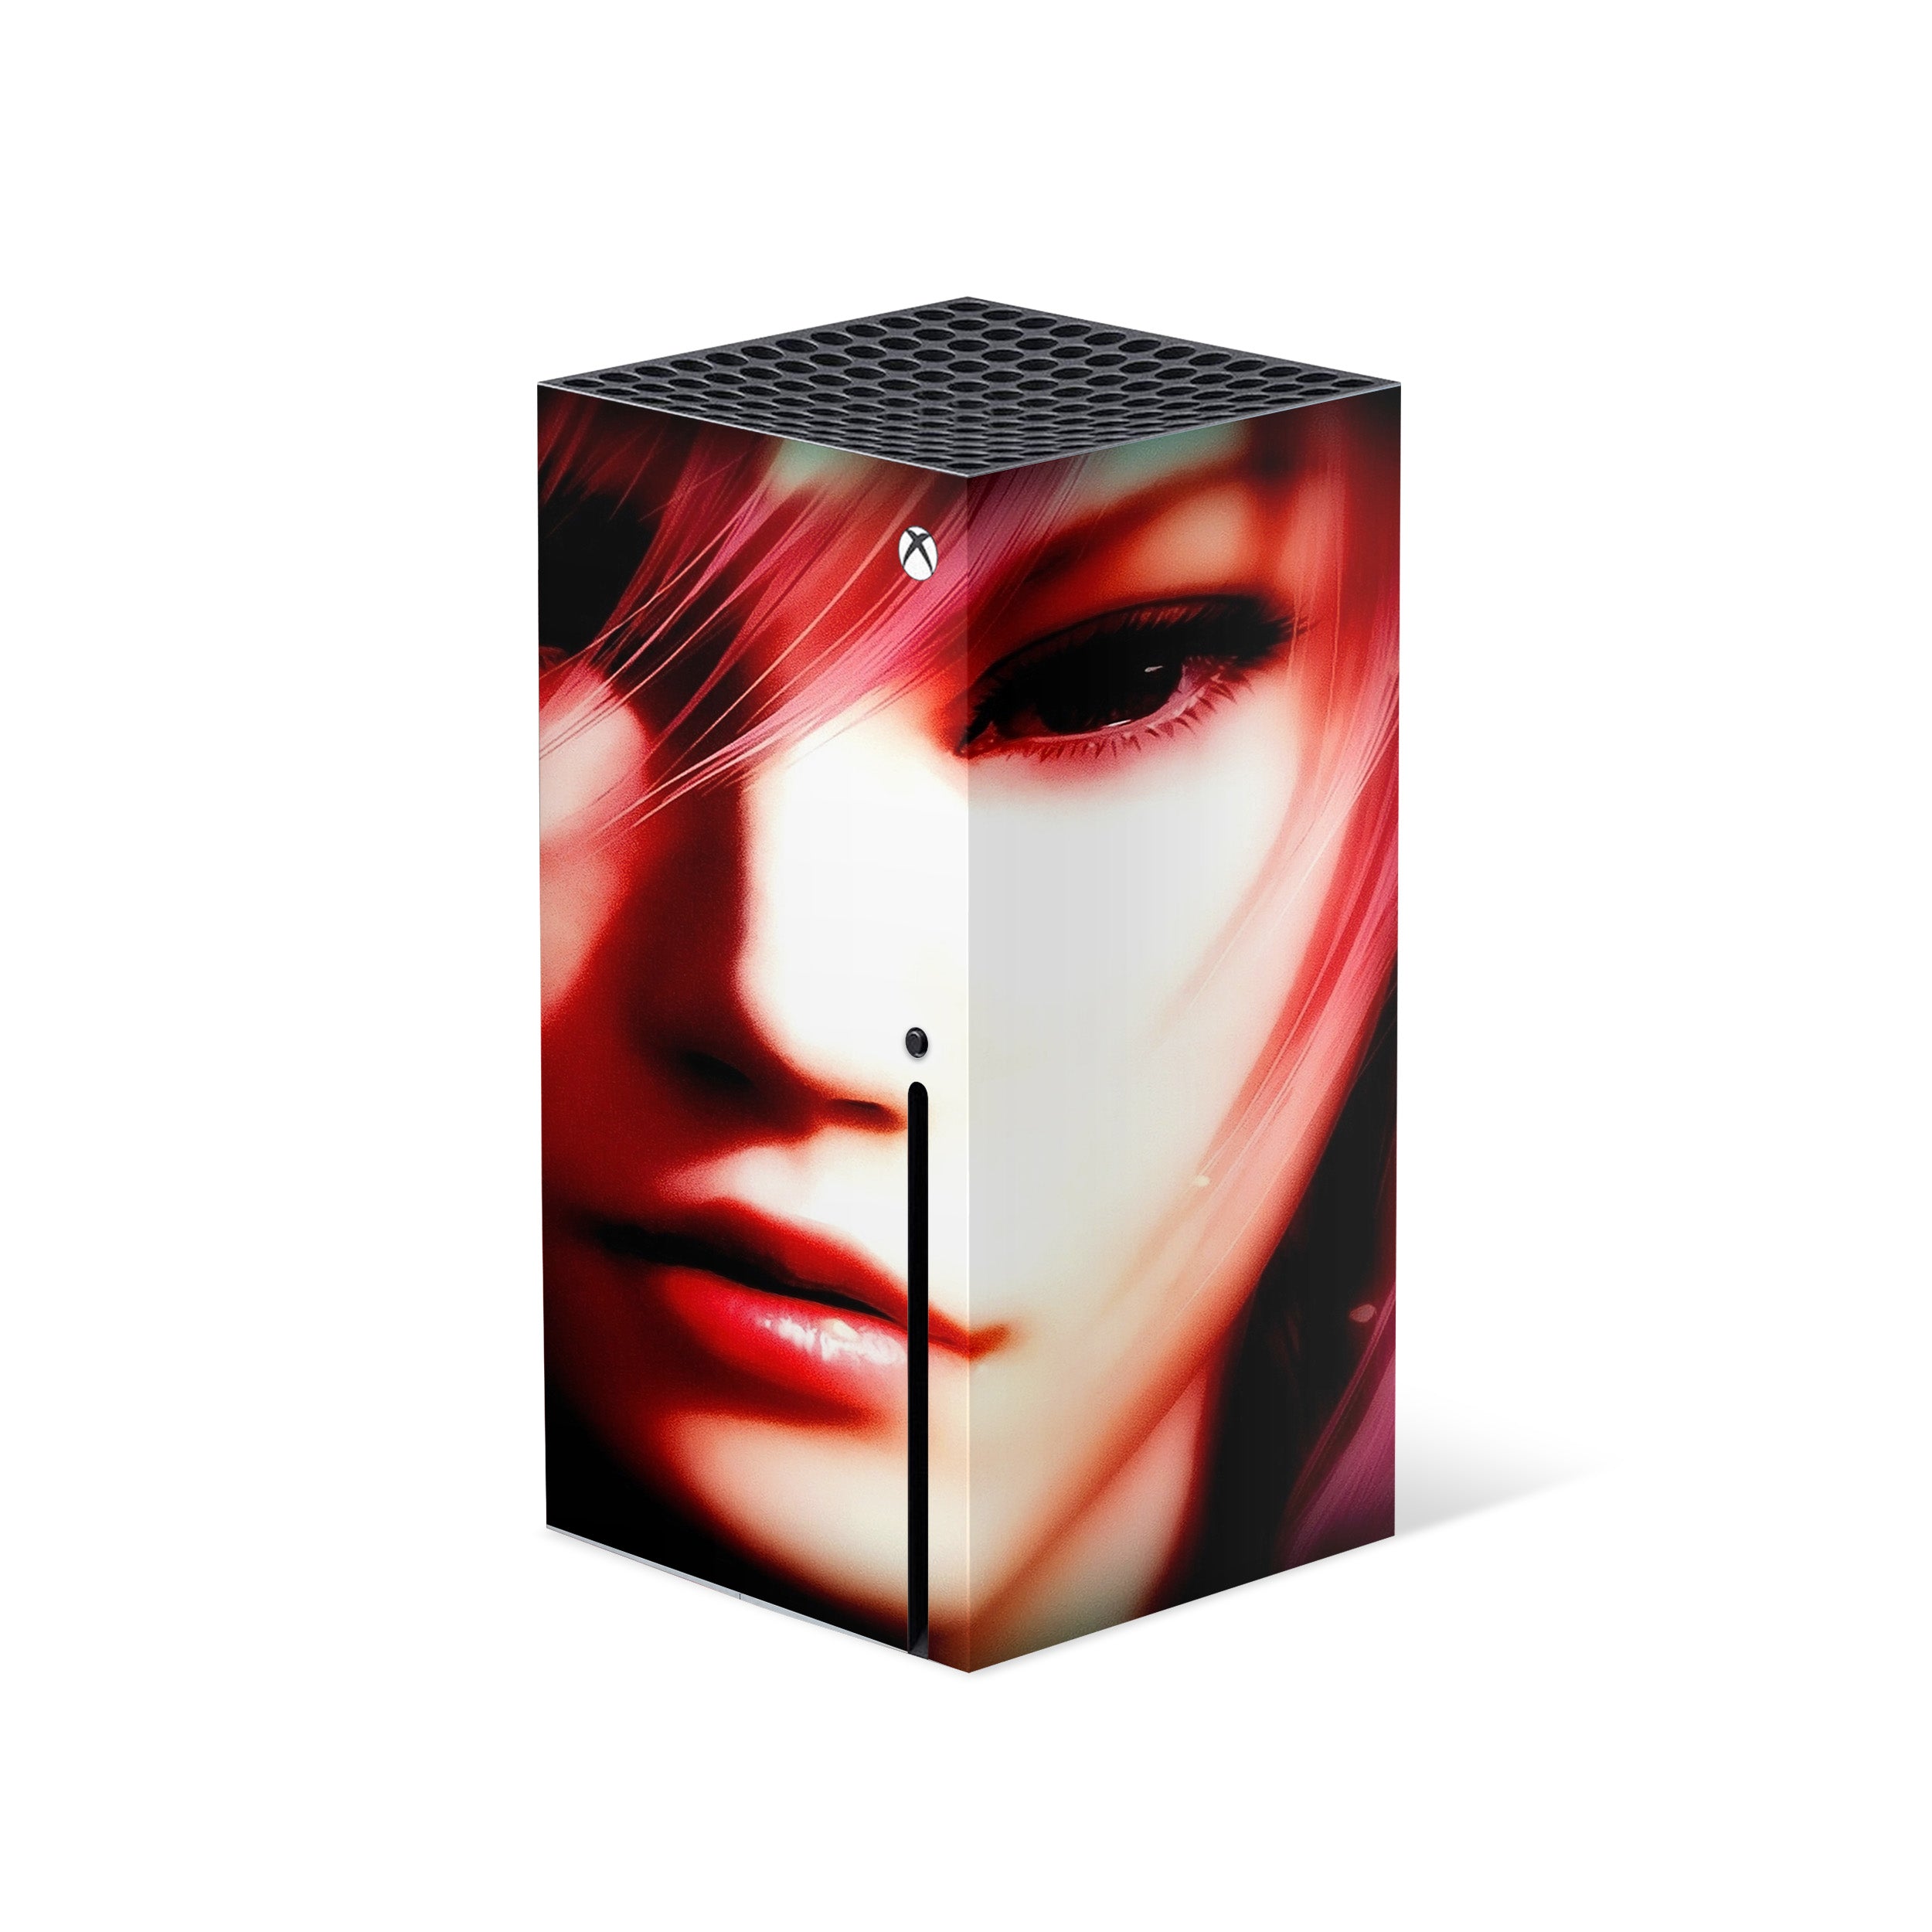 A video game skin featuring a Final Fantasy 13 Lightning design for the Xbox Series X.